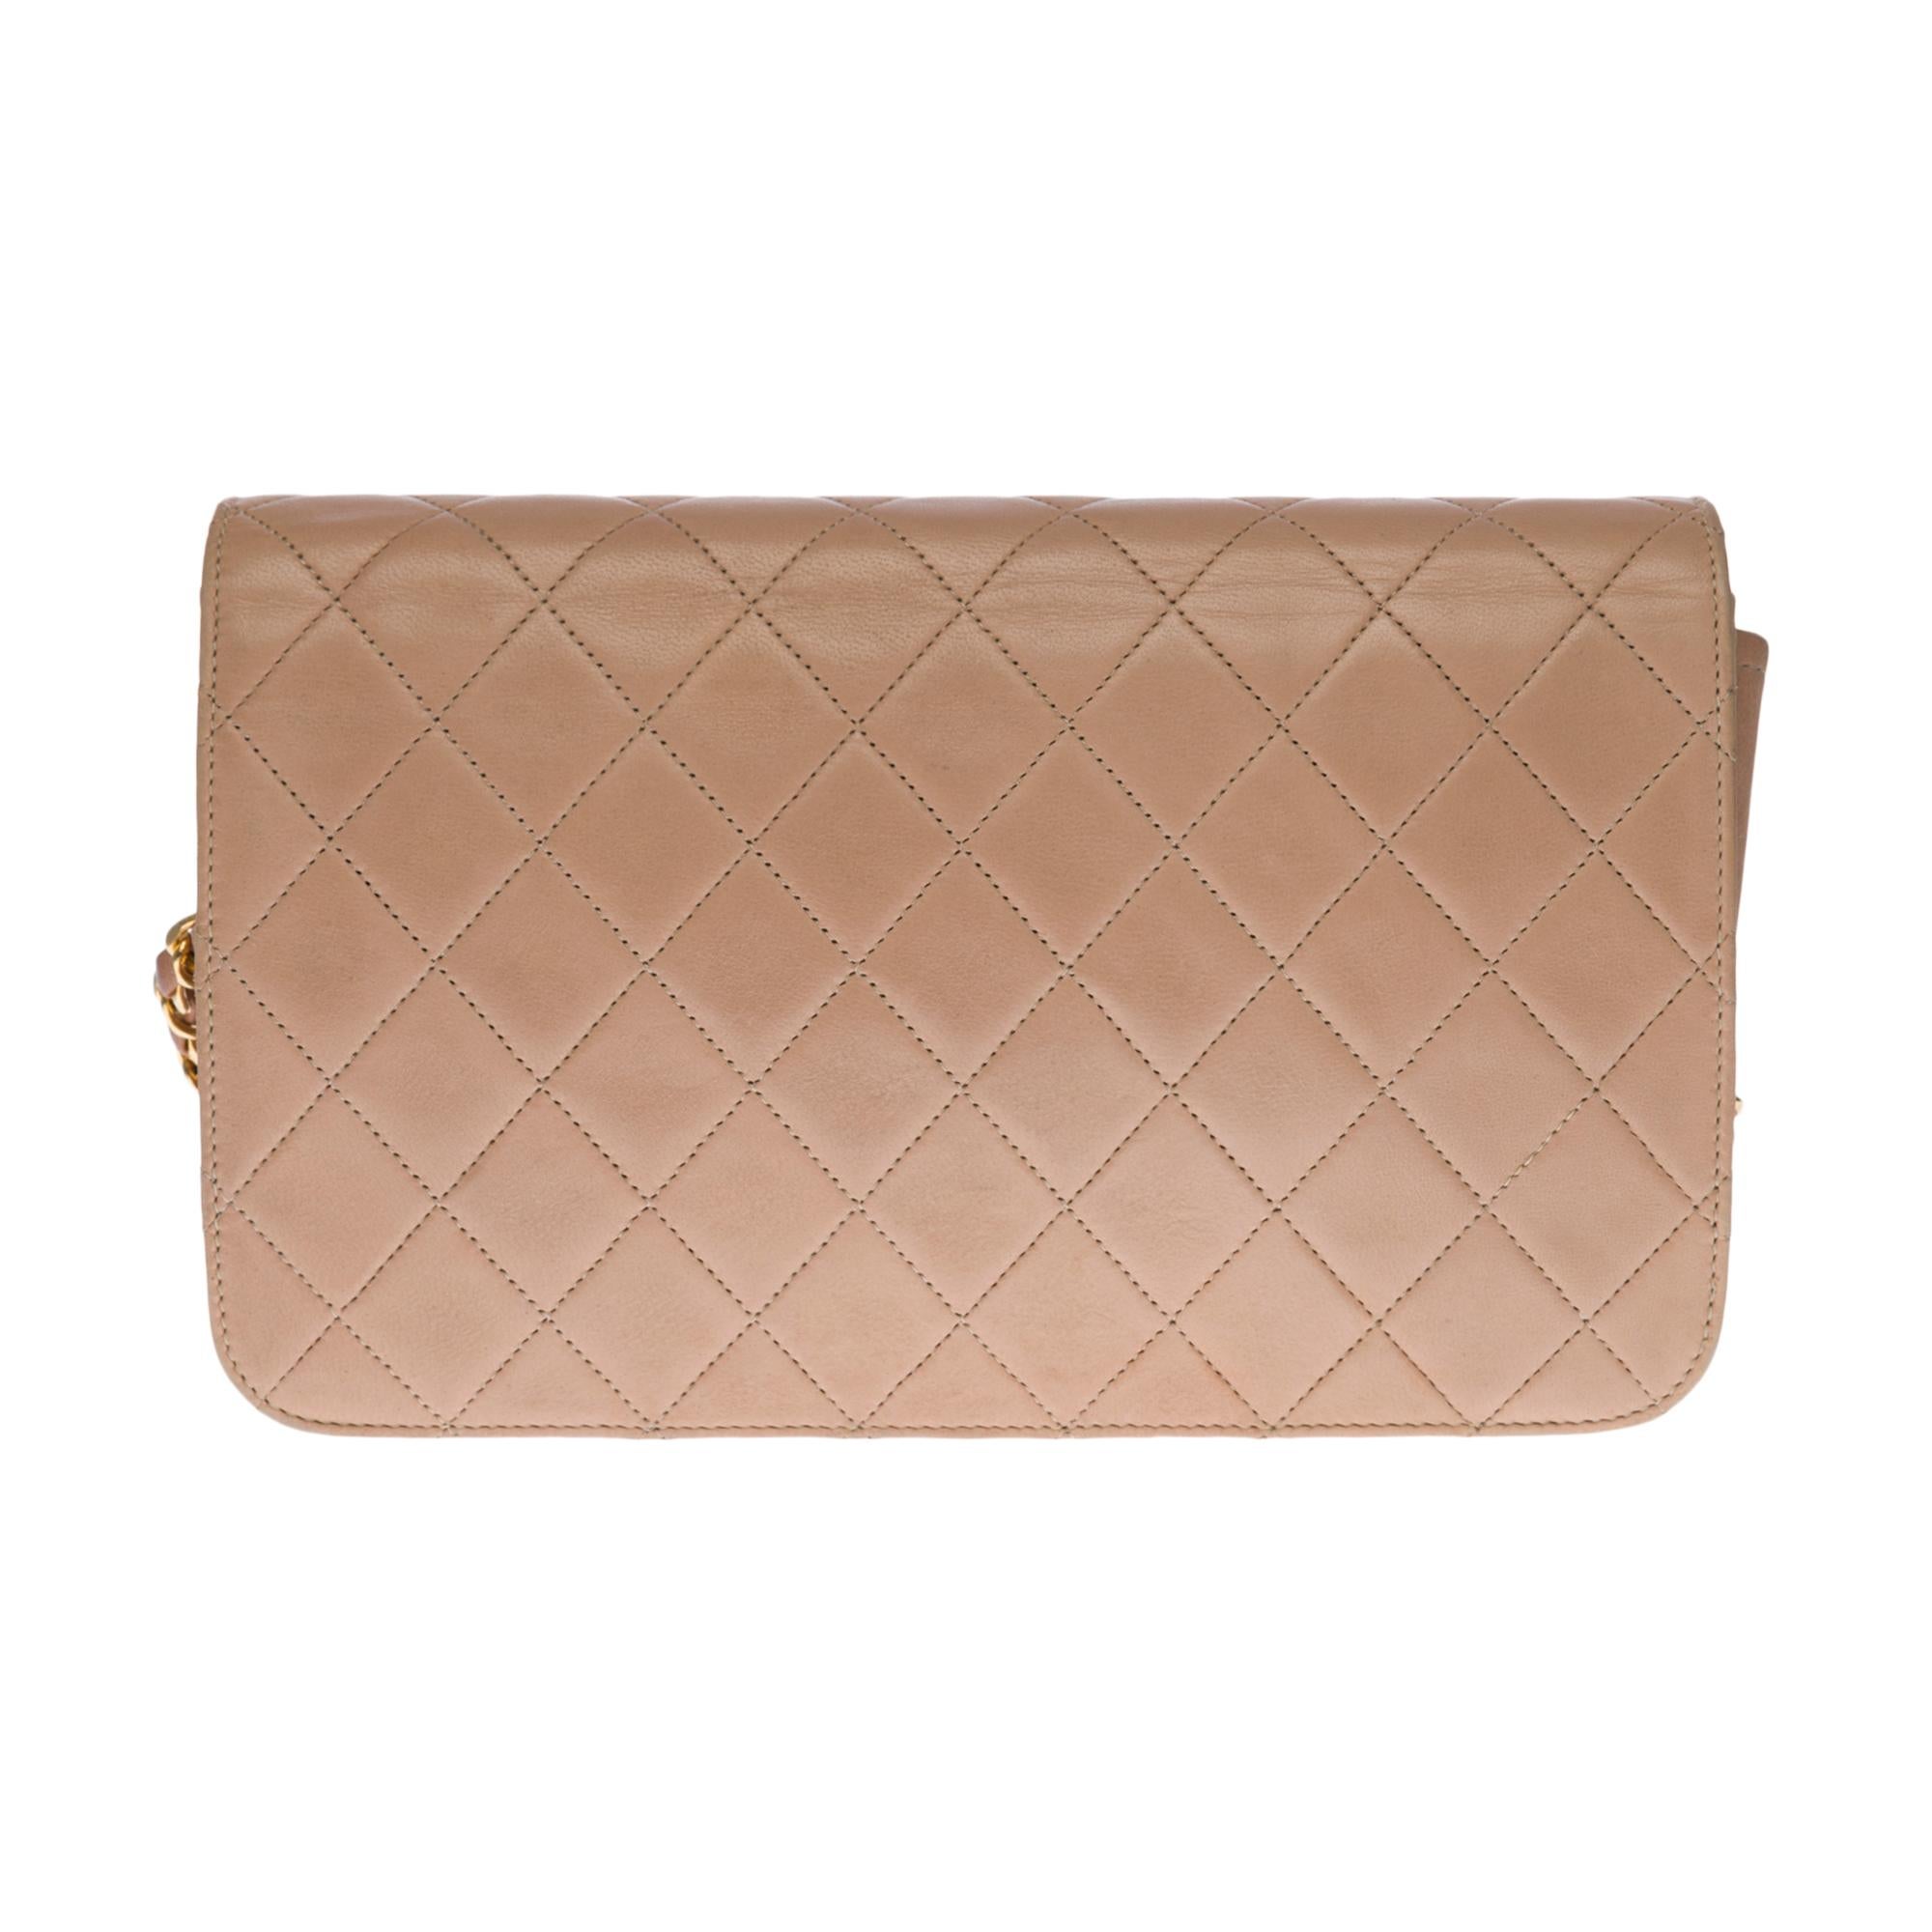 Lovely Chanel Classic full flap bag in beige quilted lambskin, gold-tone metal hardware, gold-tone metal chain interwoven with beige leather.
Flap closure, gold-tone CC logo clasp.
Lining in brown leather, 1 zipped pocket.
Signature: 